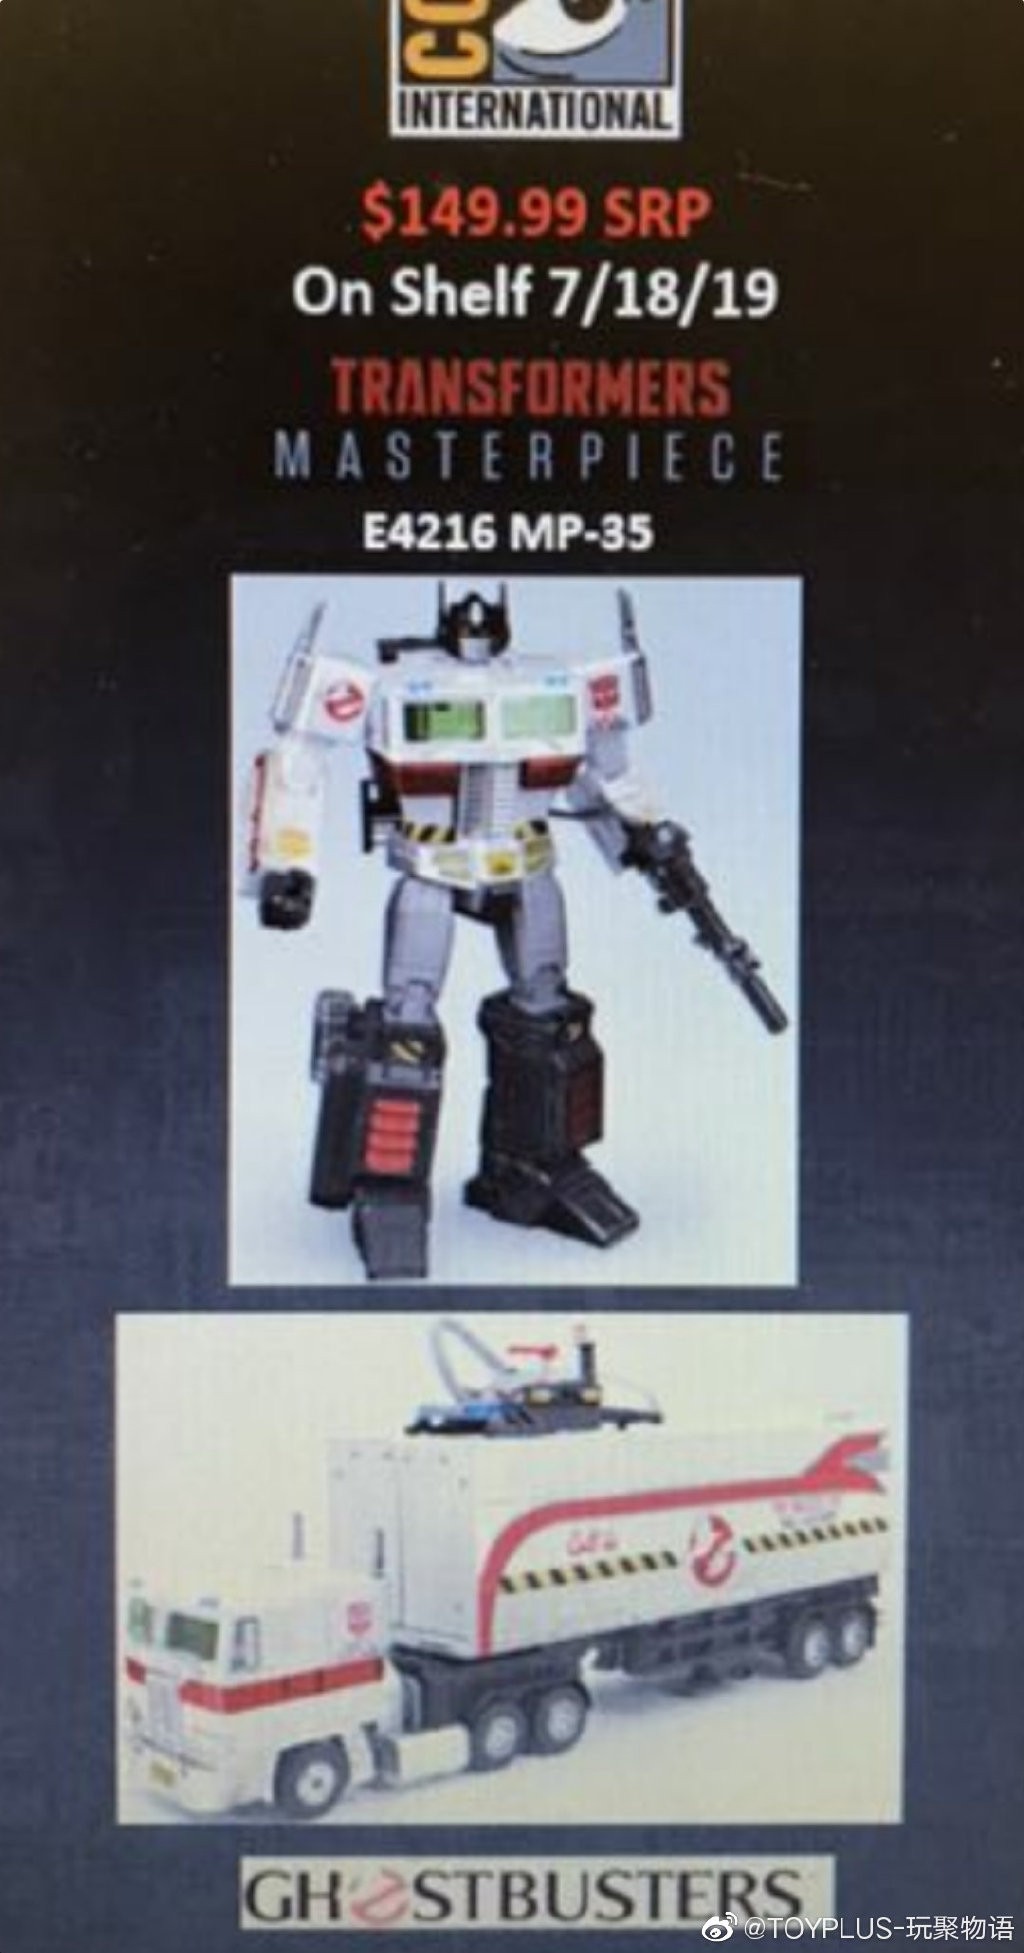 Exclusivity, Package and Reasonable Price Revealed for Ghostbuster MP 10 Optimus Prime ...